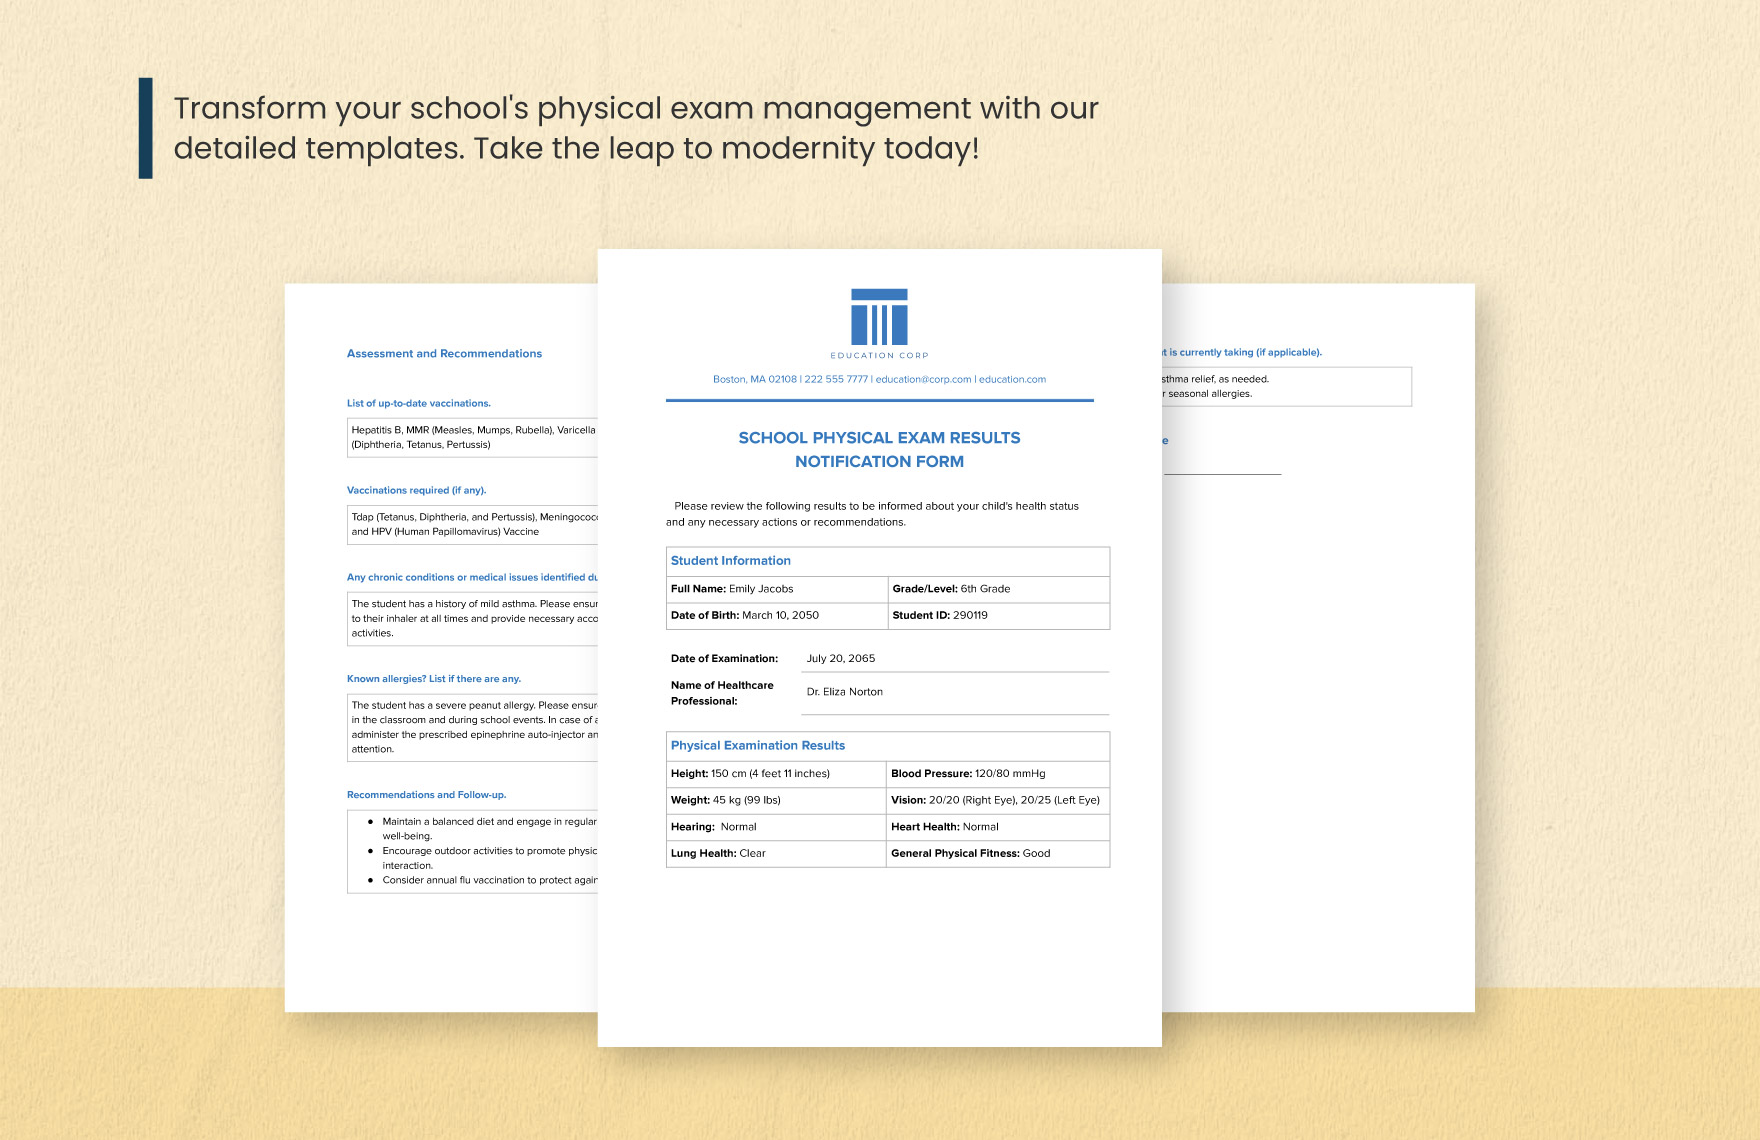 School Physical Exam Results Notification Form Template